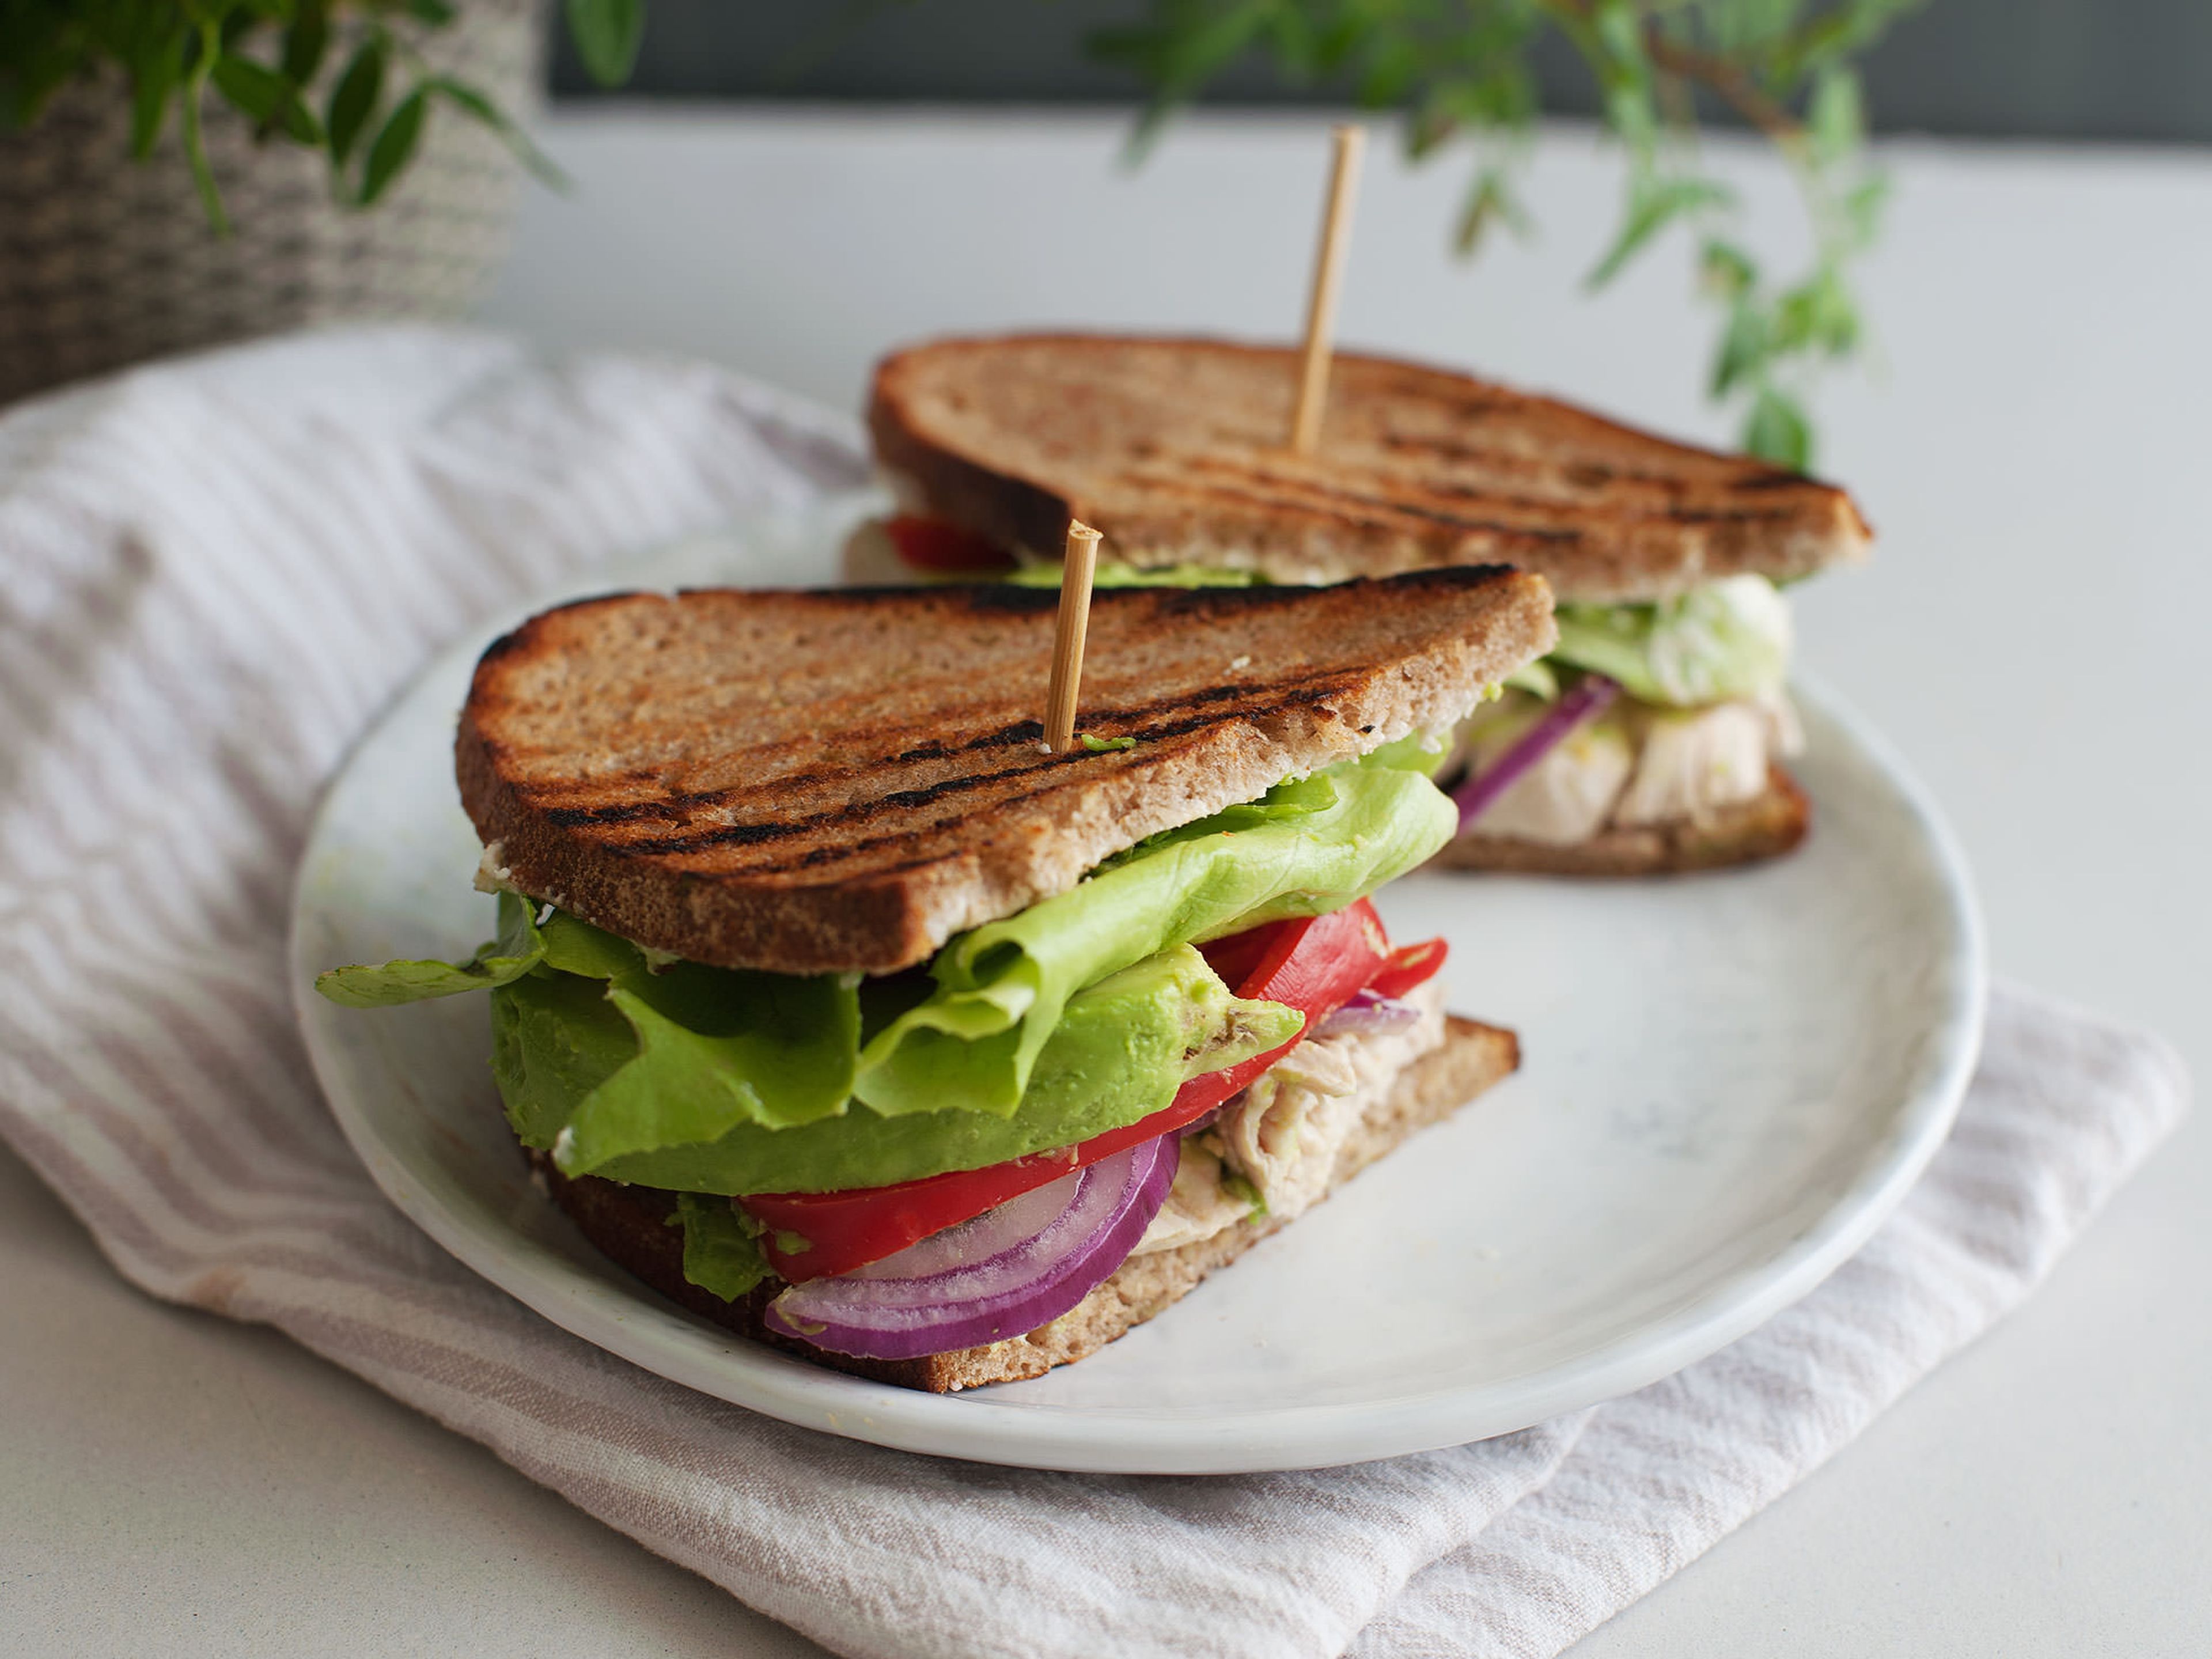 Poached chicken and avocado sandwich